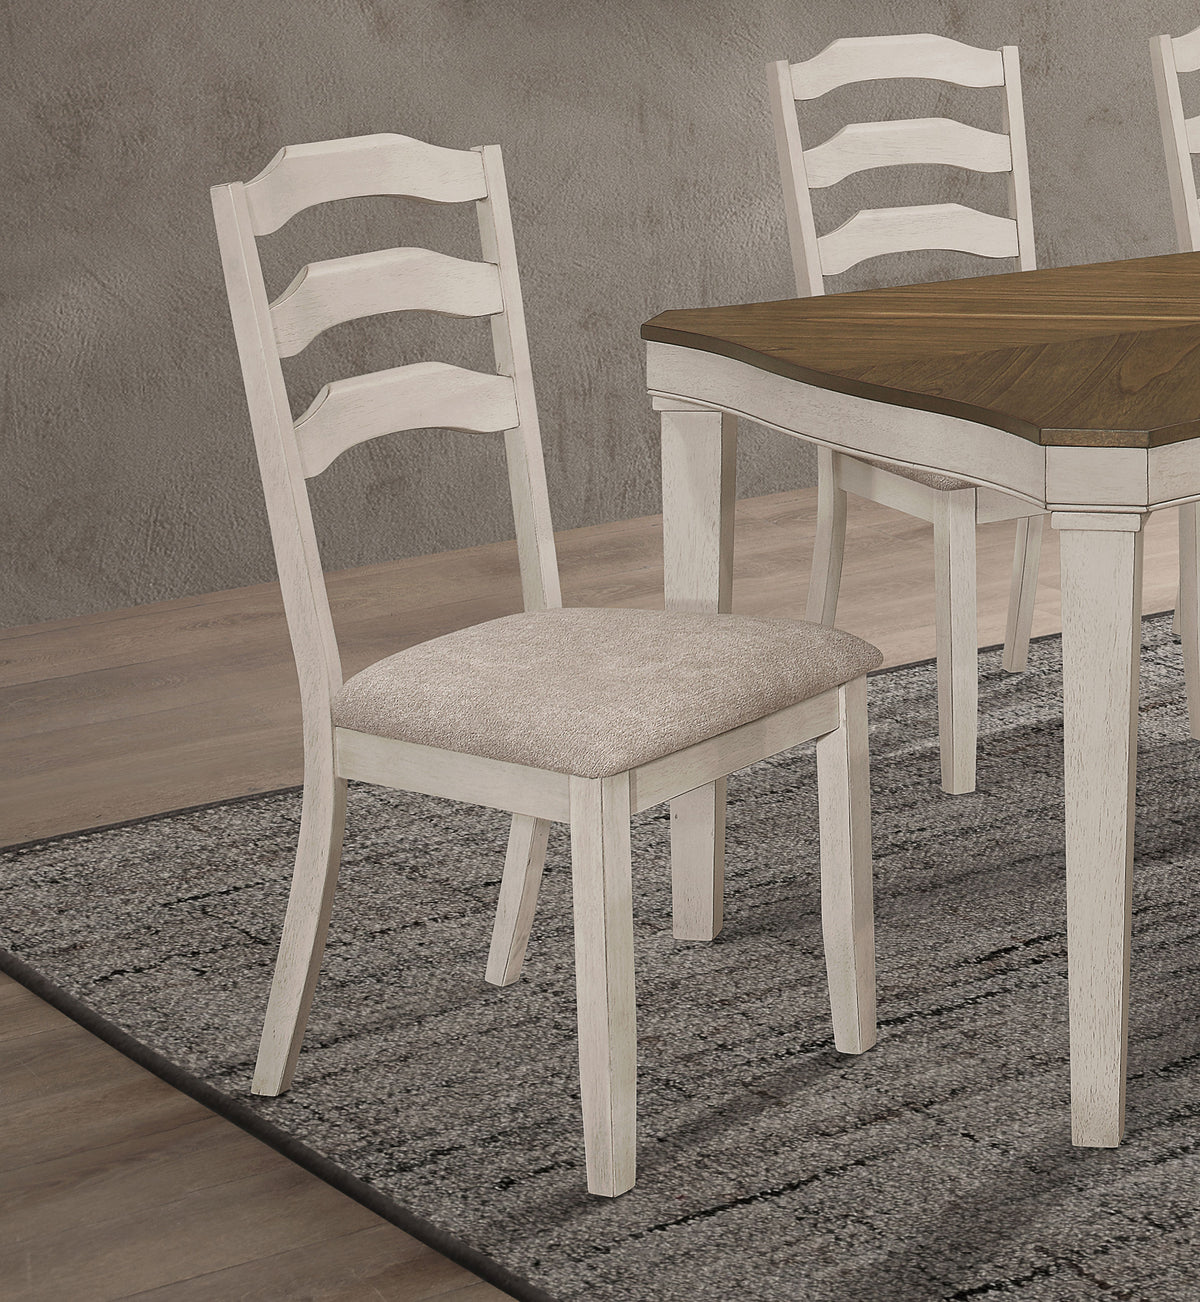 Ronnie Ladder Back Padded Seat Dining Side Chair Khaki and Rustic Cream (Set of 2) Ronnie Ladder Back Padded Seat Dining Side Chair Khaki and Rustic Cream (Set of 2) Half Price Furniture